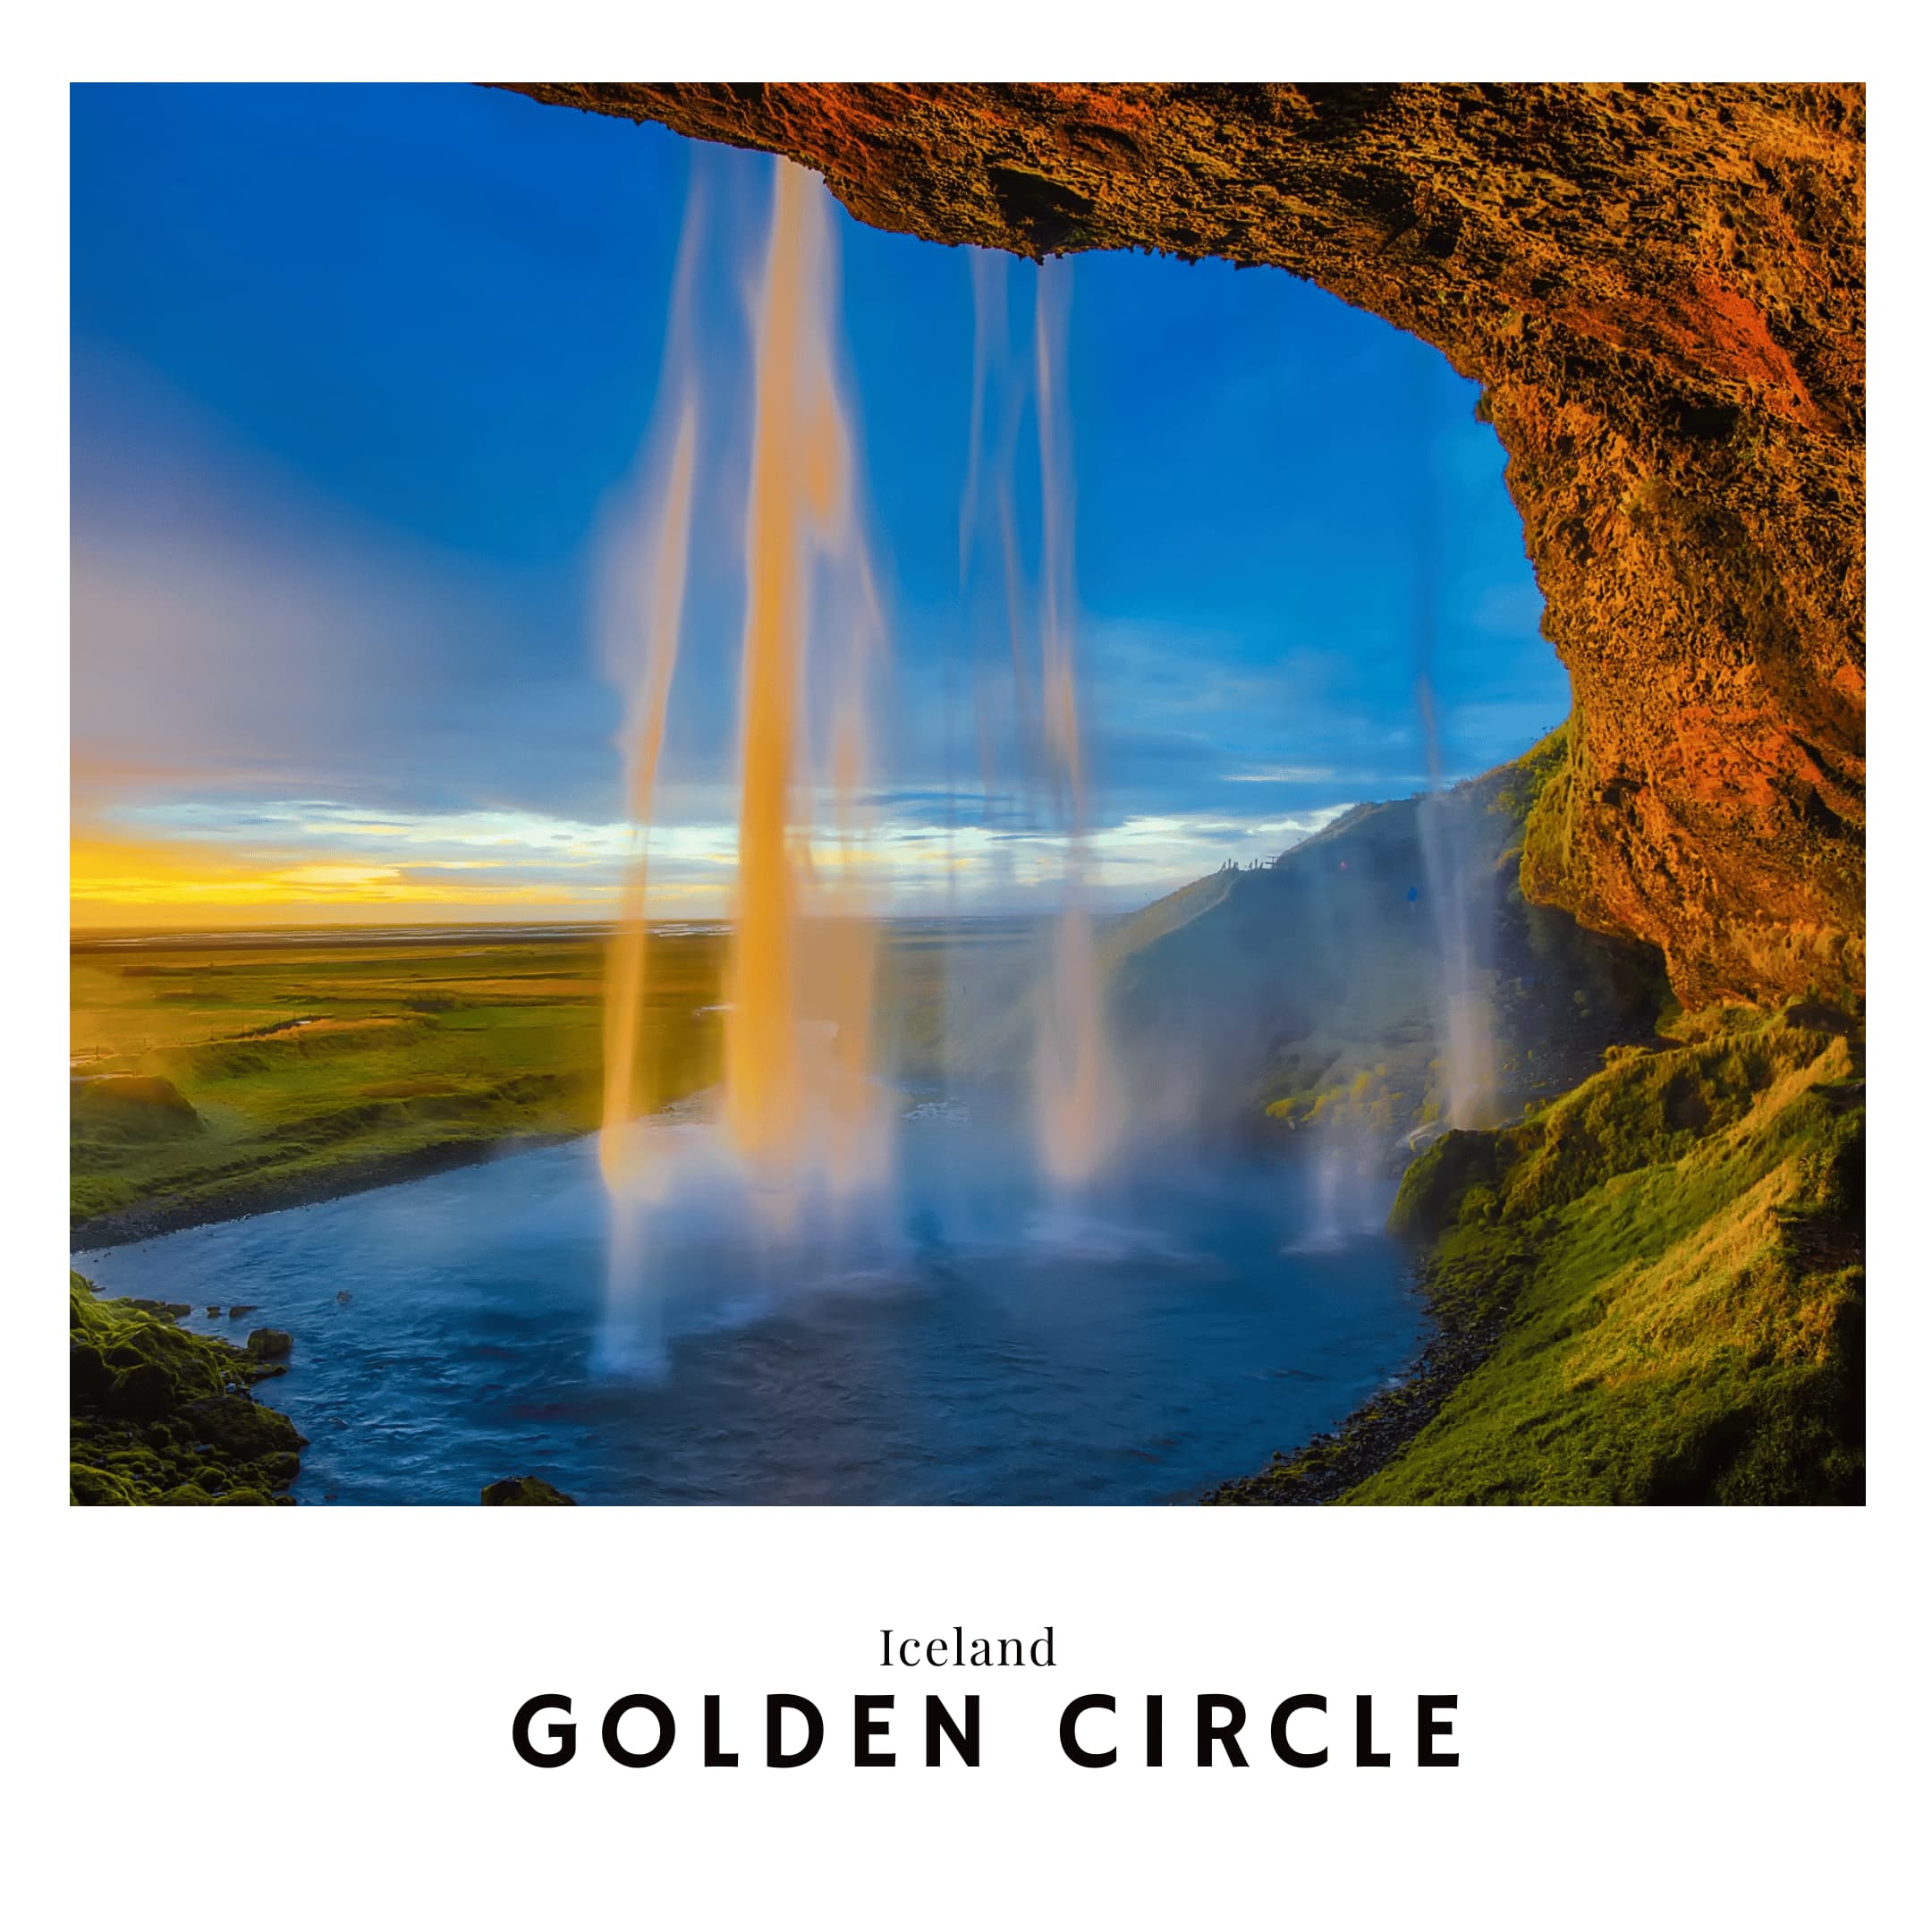 Link to Iceland's Golden Circle travel guide